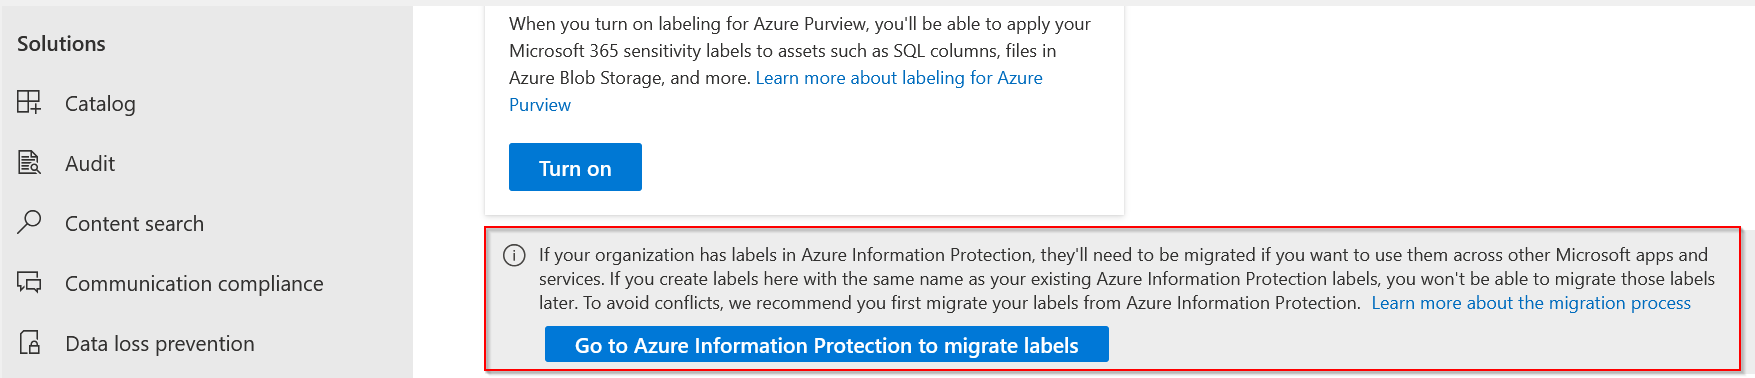 Solutions

RR

{4

Catalog

Audit

Content search
Communication compliance

Data loss prevention

When you turn on labeling for Azure Purview, you'll be able to apply your
Microsoft 365 sensitivity labels to assets such as SQL columns, files in
Azure Blob Storage, and more. Learn more about labeling for Azure
Purview

Turn on

@ Ifyour organization has labels in Azure Information Protection, they'll need to be migrated if you want to use them across other Microsoft apps and
services. If you create labels here with the same name as your existing Azure Information Protection labels, you won't be able to migrate those labels
later. To avoid conflicts, we recommend you first migrate your labels from Azure Information Protection. Learn more about the migration process

Go to Azure Information Protection to migrate labels